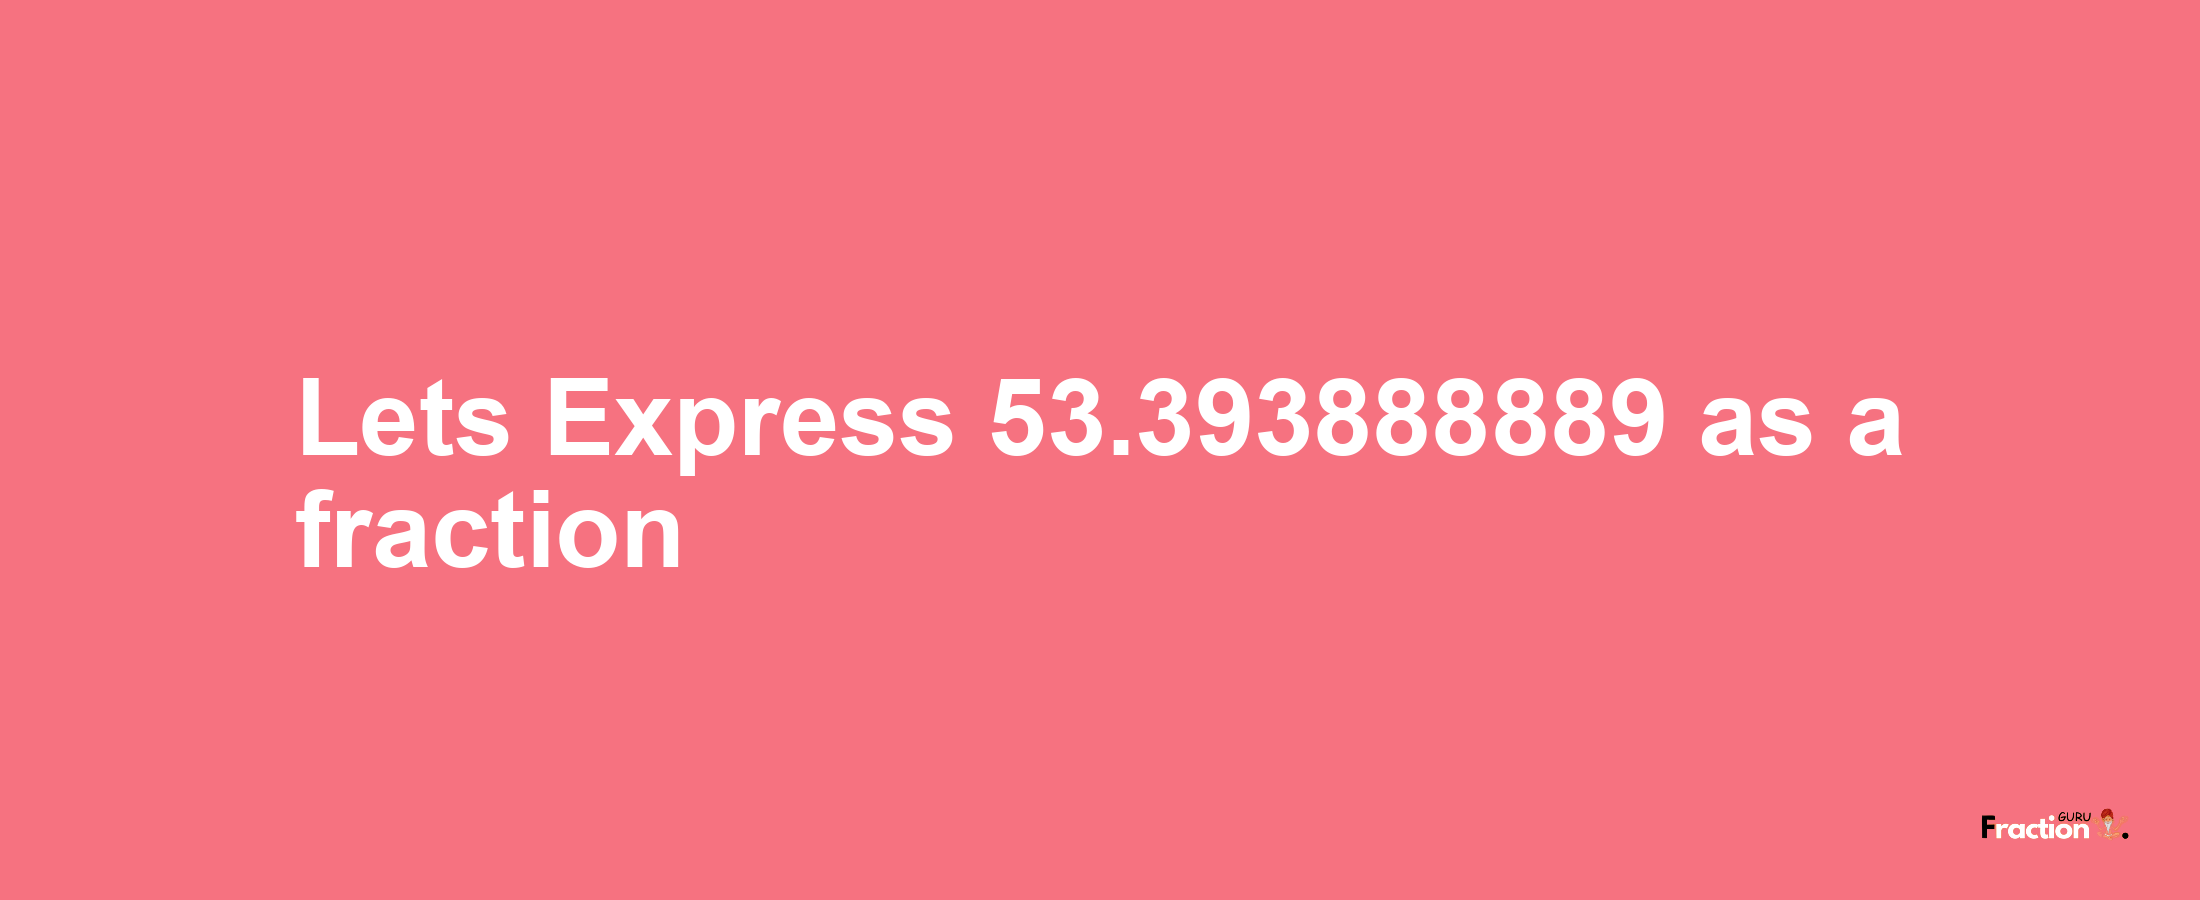 Lets Express 53.393888889 as afraction